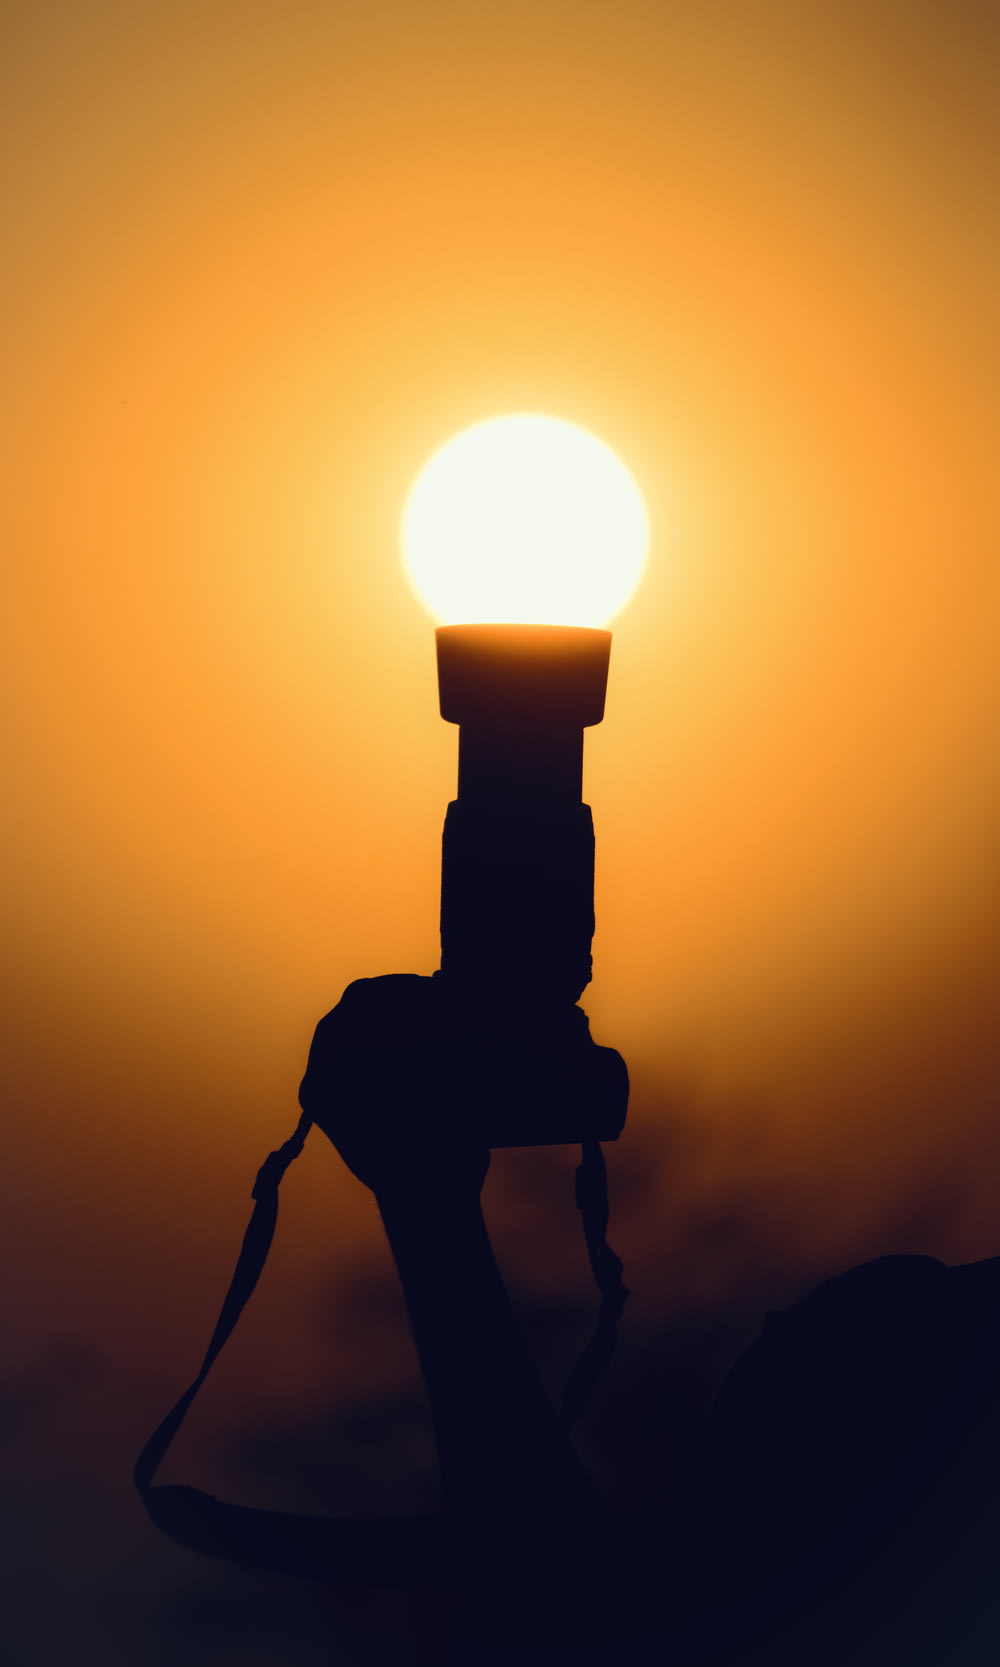 a silhouette of a person holding a light bulb